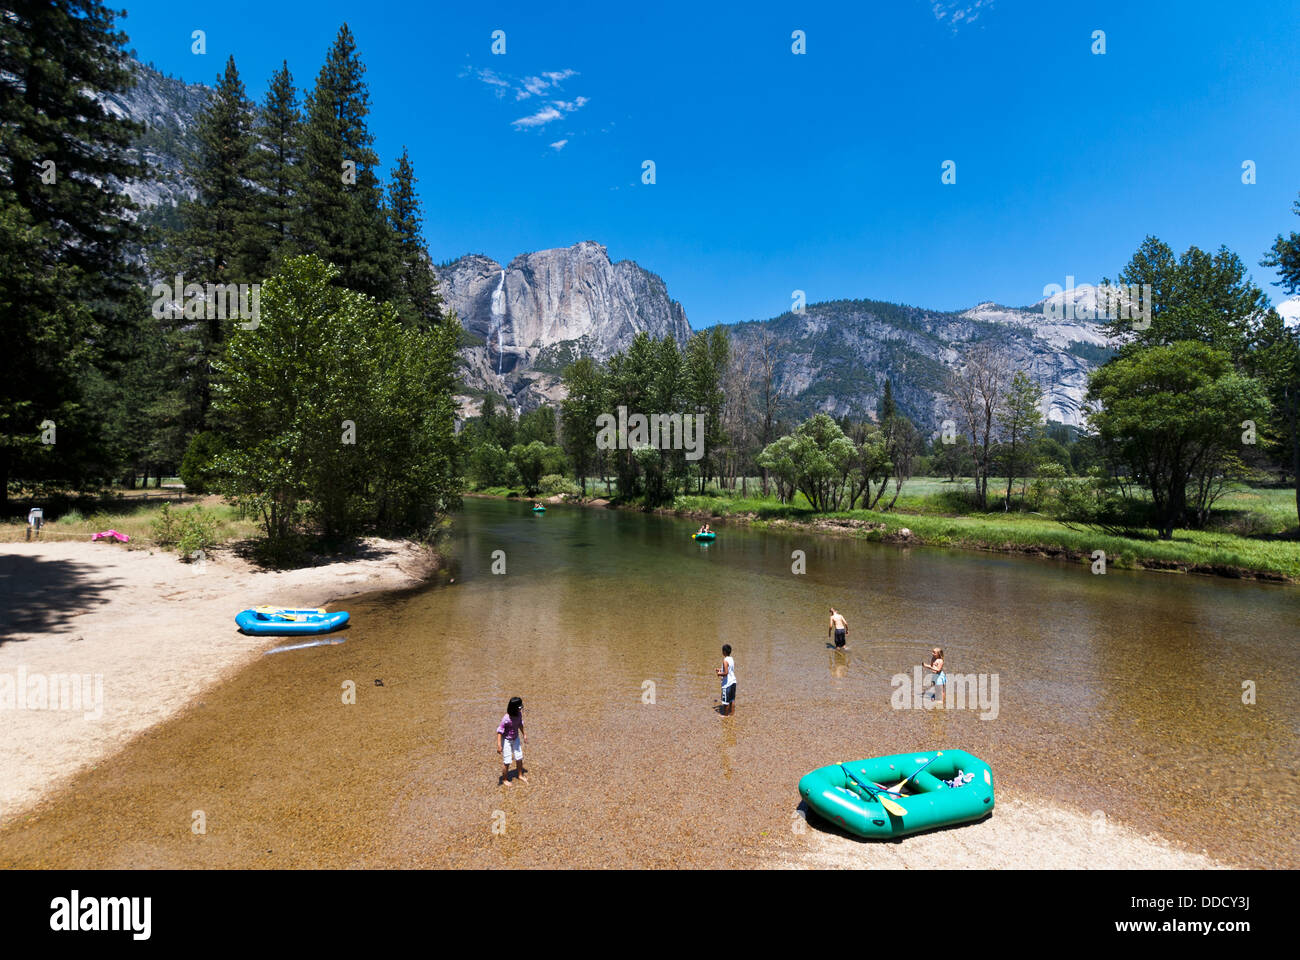 Children playing in the Merced River in Yosemite Valley. Yosemite National Park, California, USA. Stock Photo